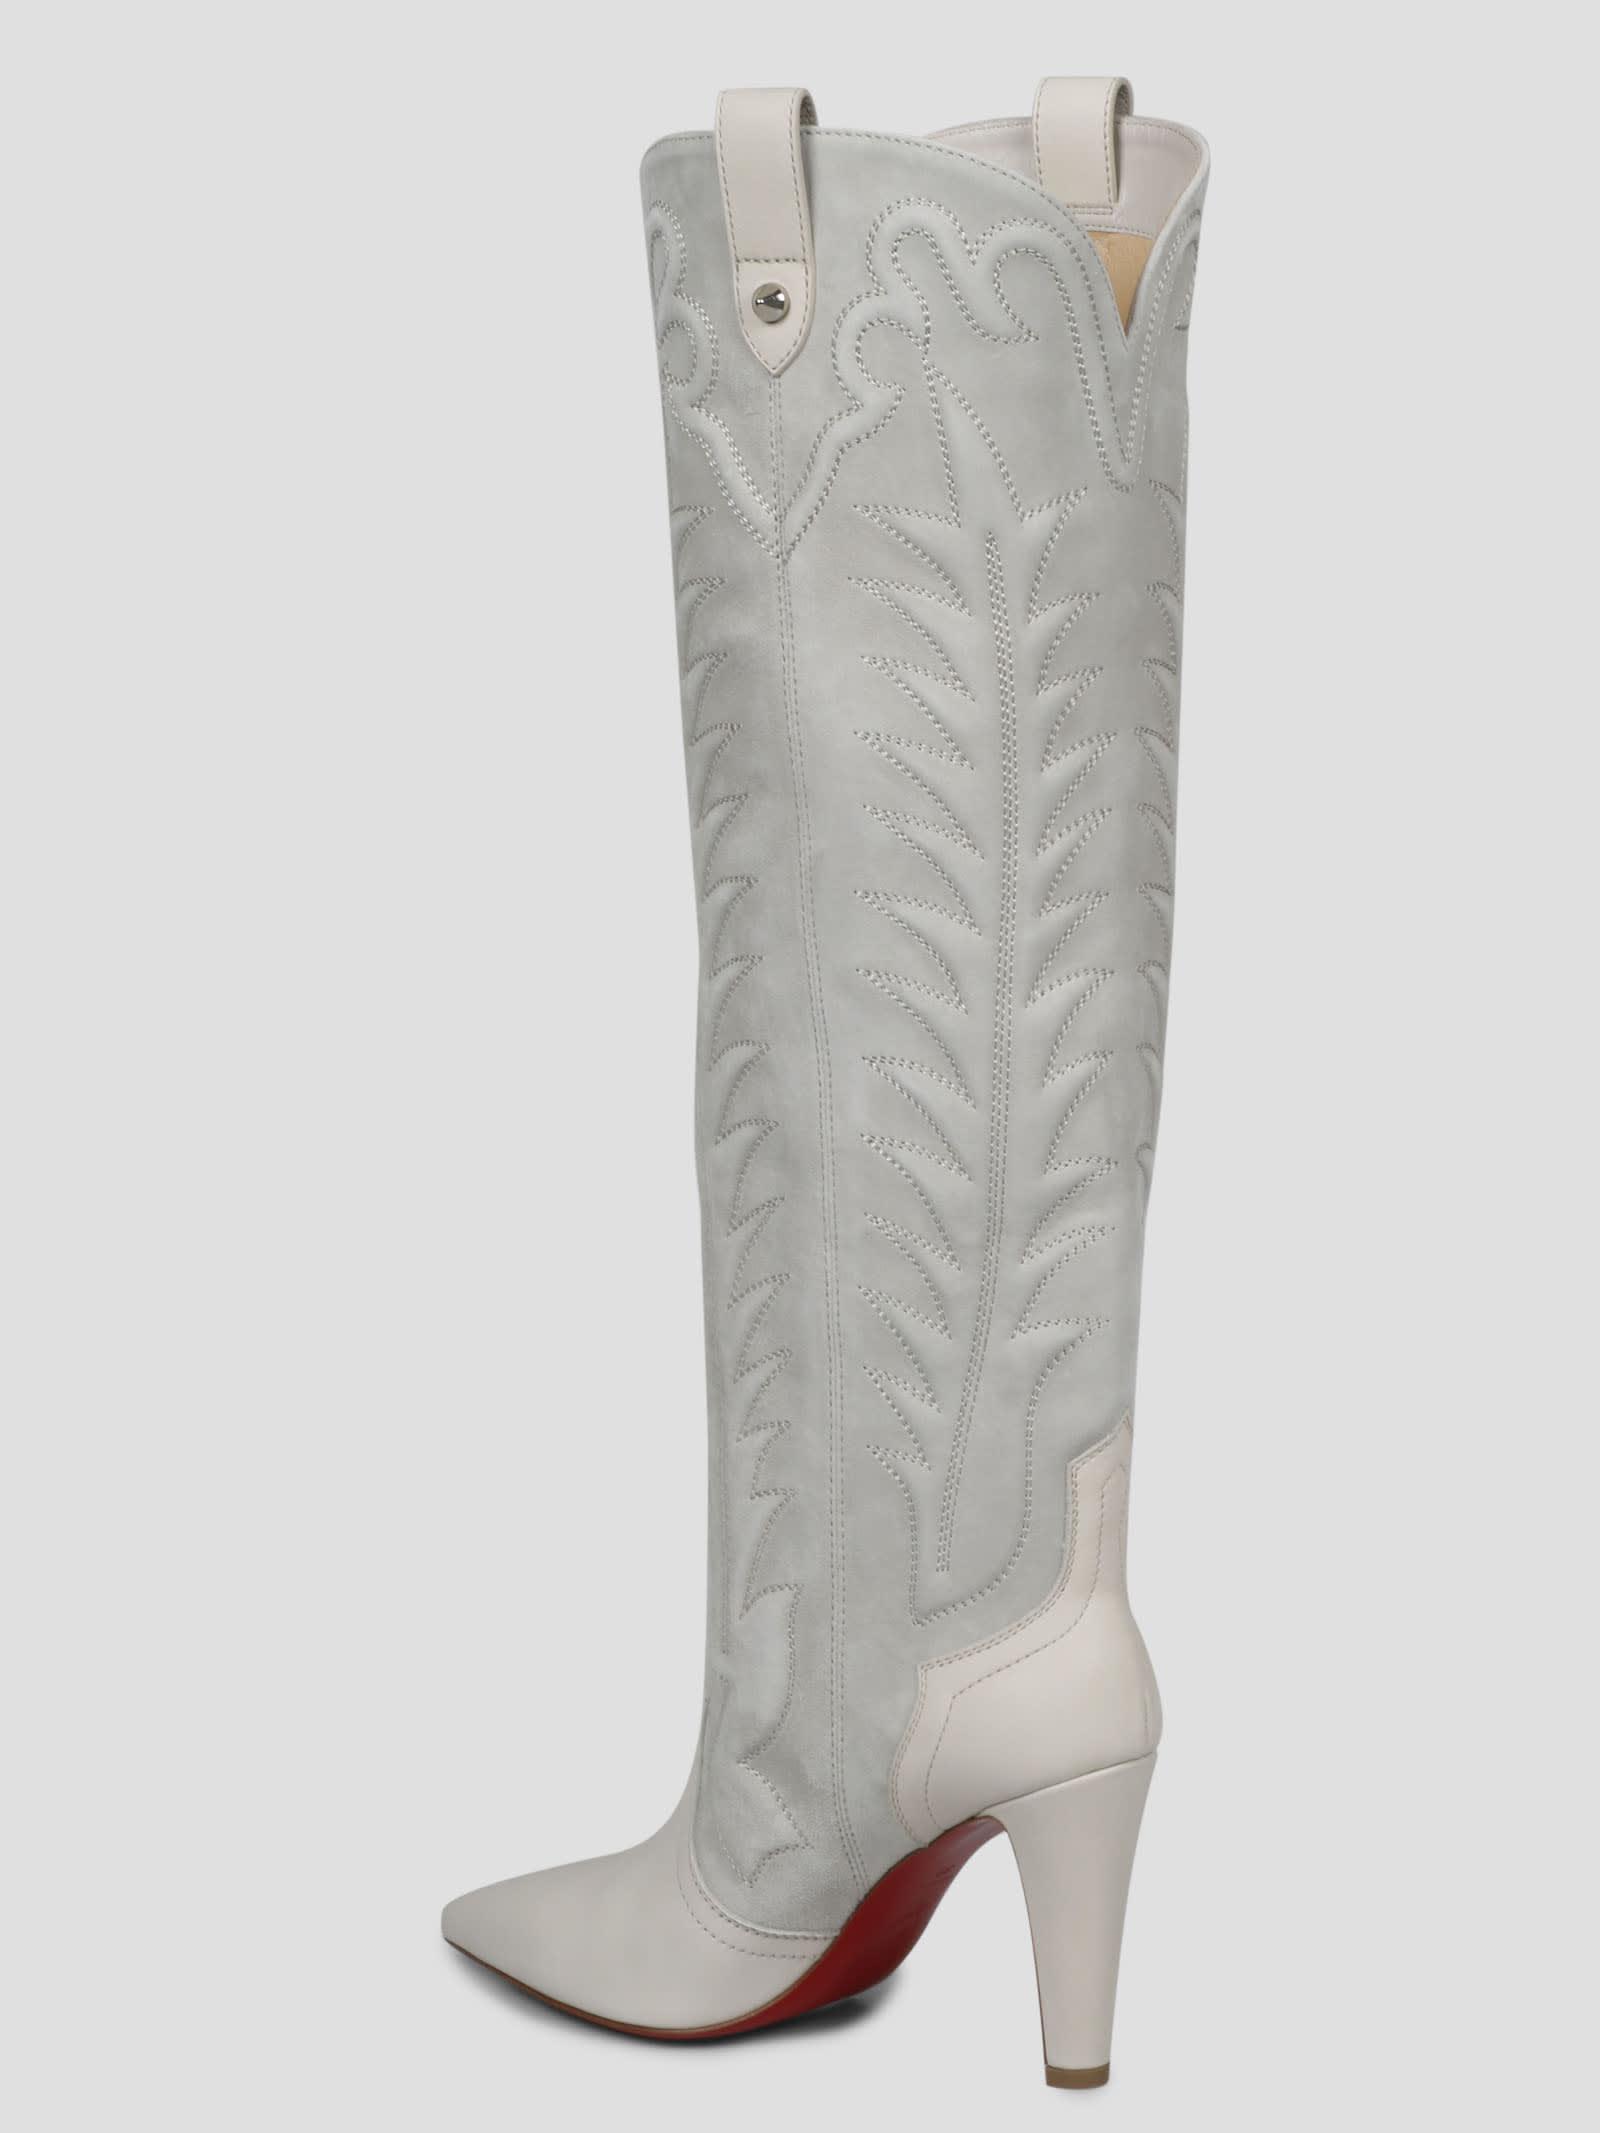 Christian Louboutin - Santia Botta 85 Embroidered Suede And Leather Knee  Boots - Off-white -  IT36,IT36.5,IT37,IT37.5,IT38,IT38.5,IT39,IT39.5,IT40,IT40